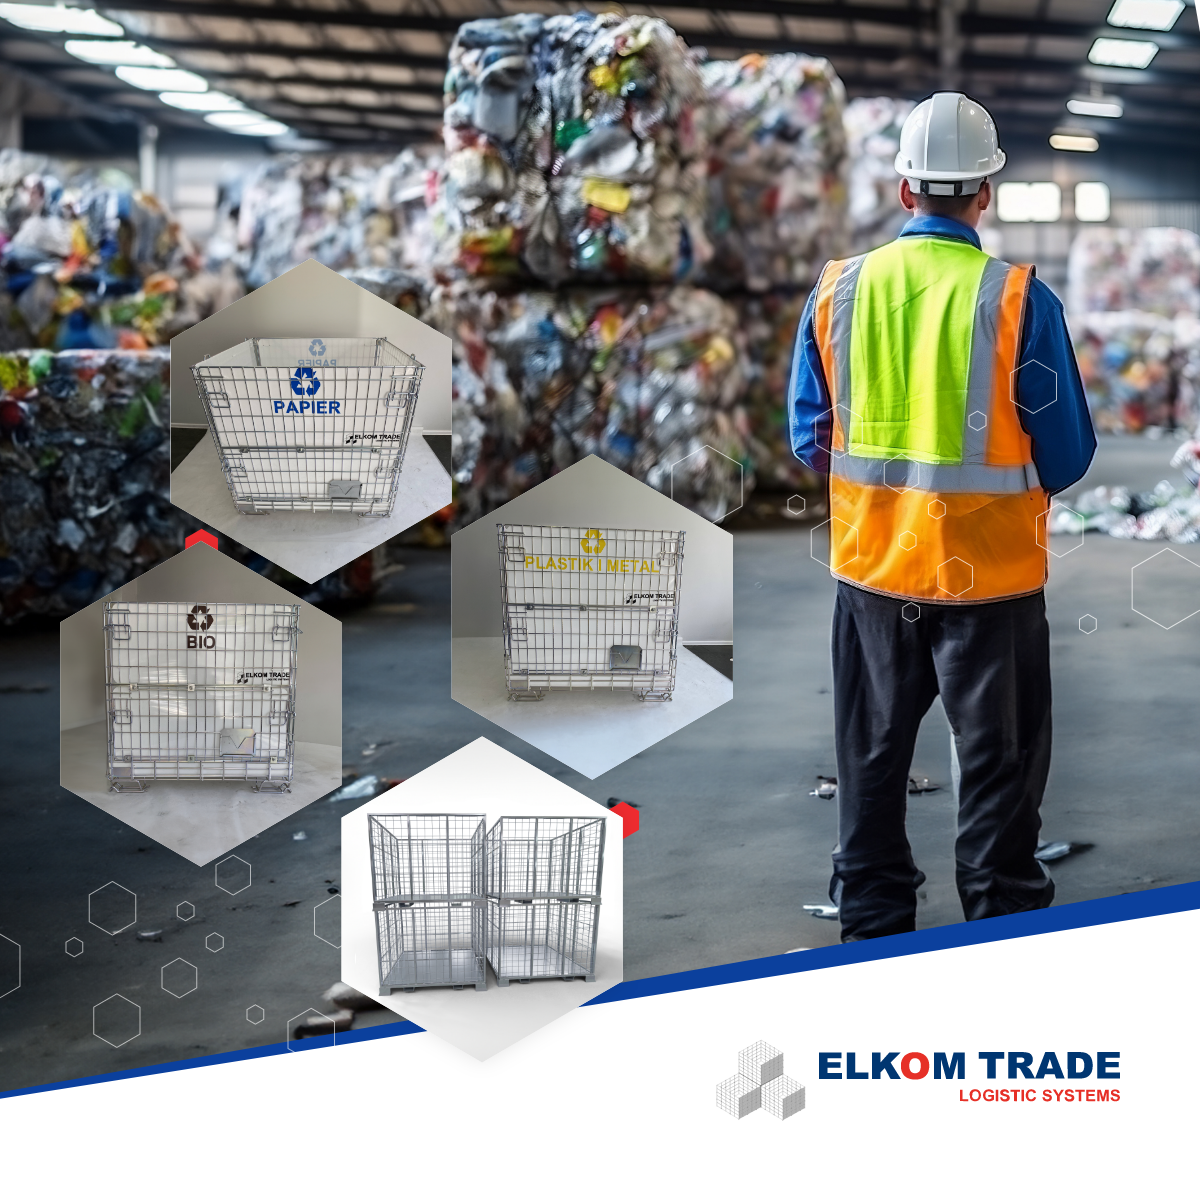 Improvements from Elkom Trade. Support for recycling industry